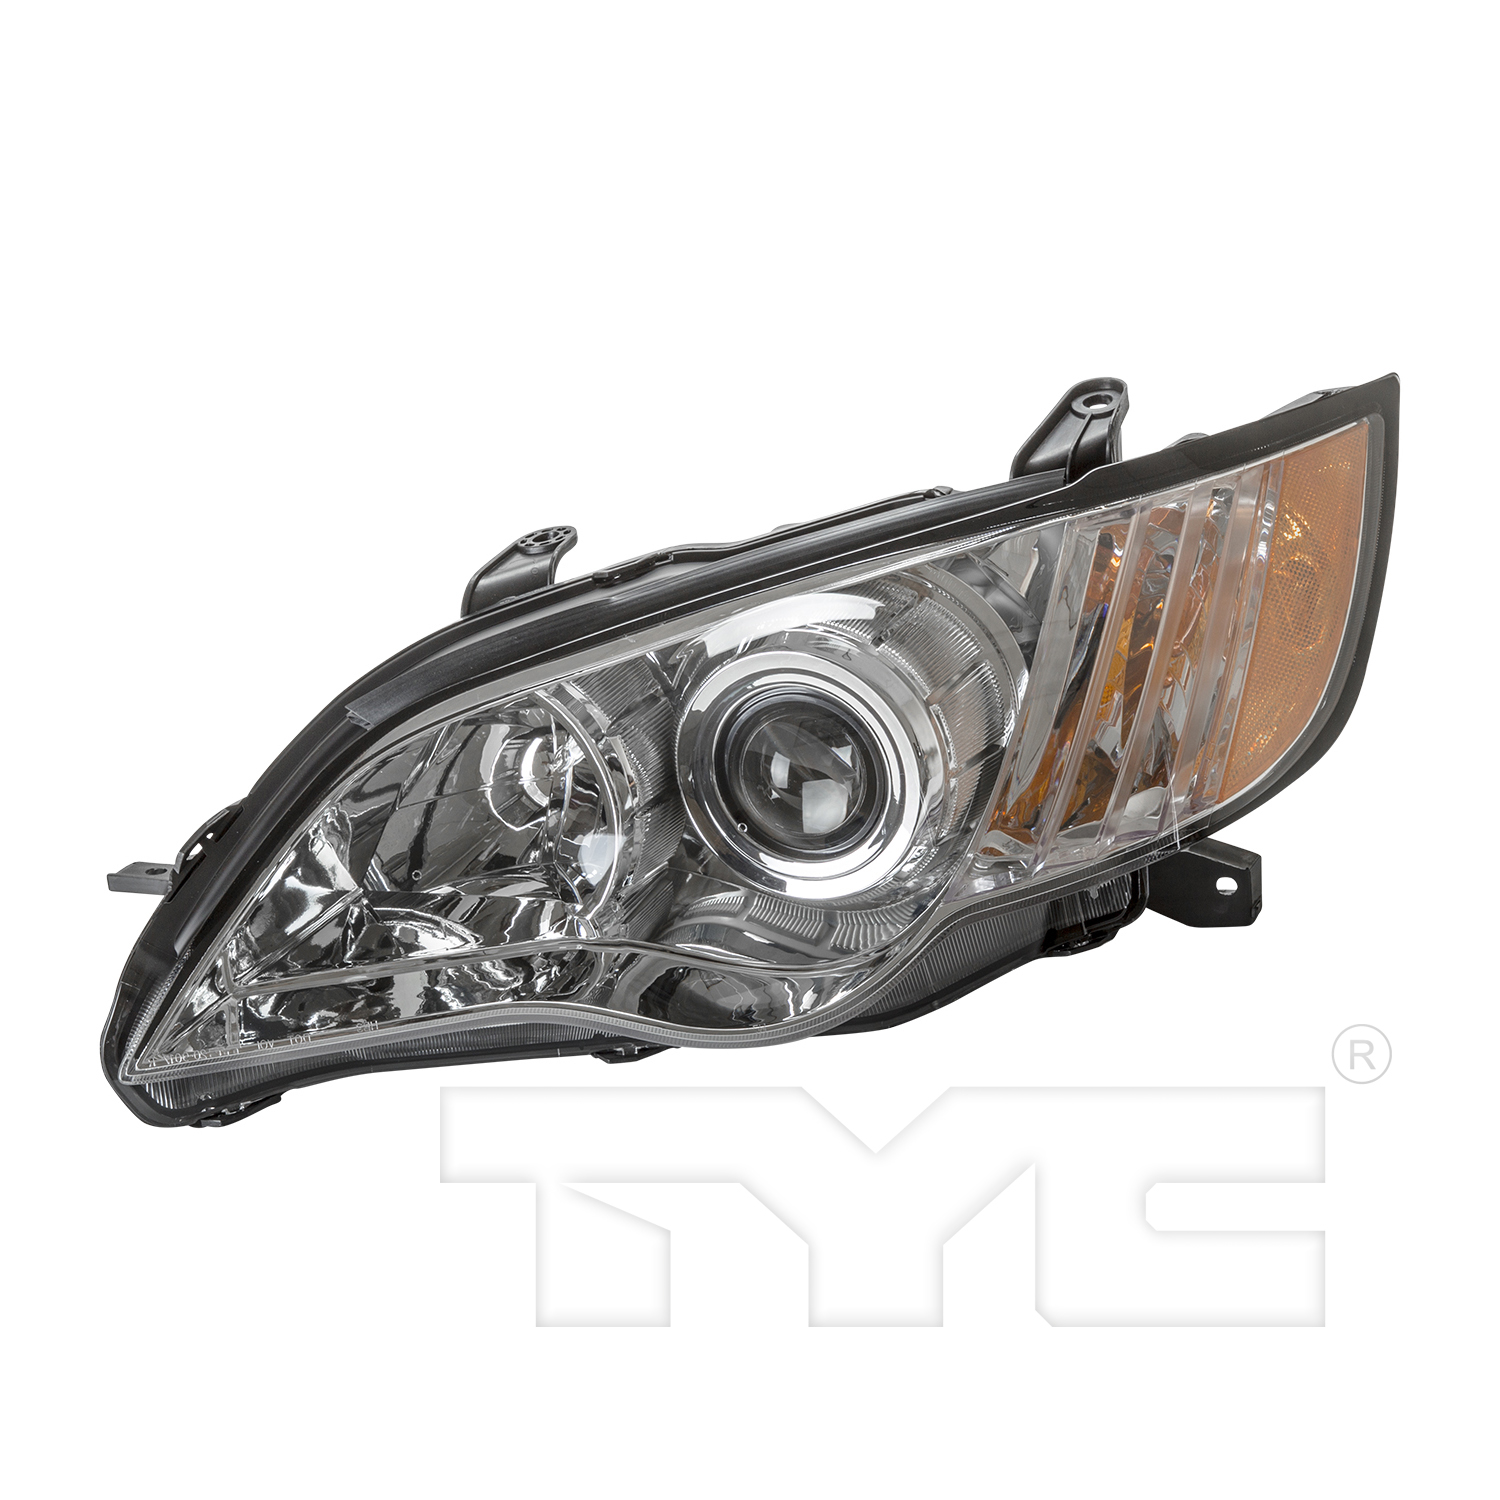 Aftermarket HEADLIGHTS for SUBARU - OUTBACK, OUTBACK,08-09,LT Headlamp assy composite